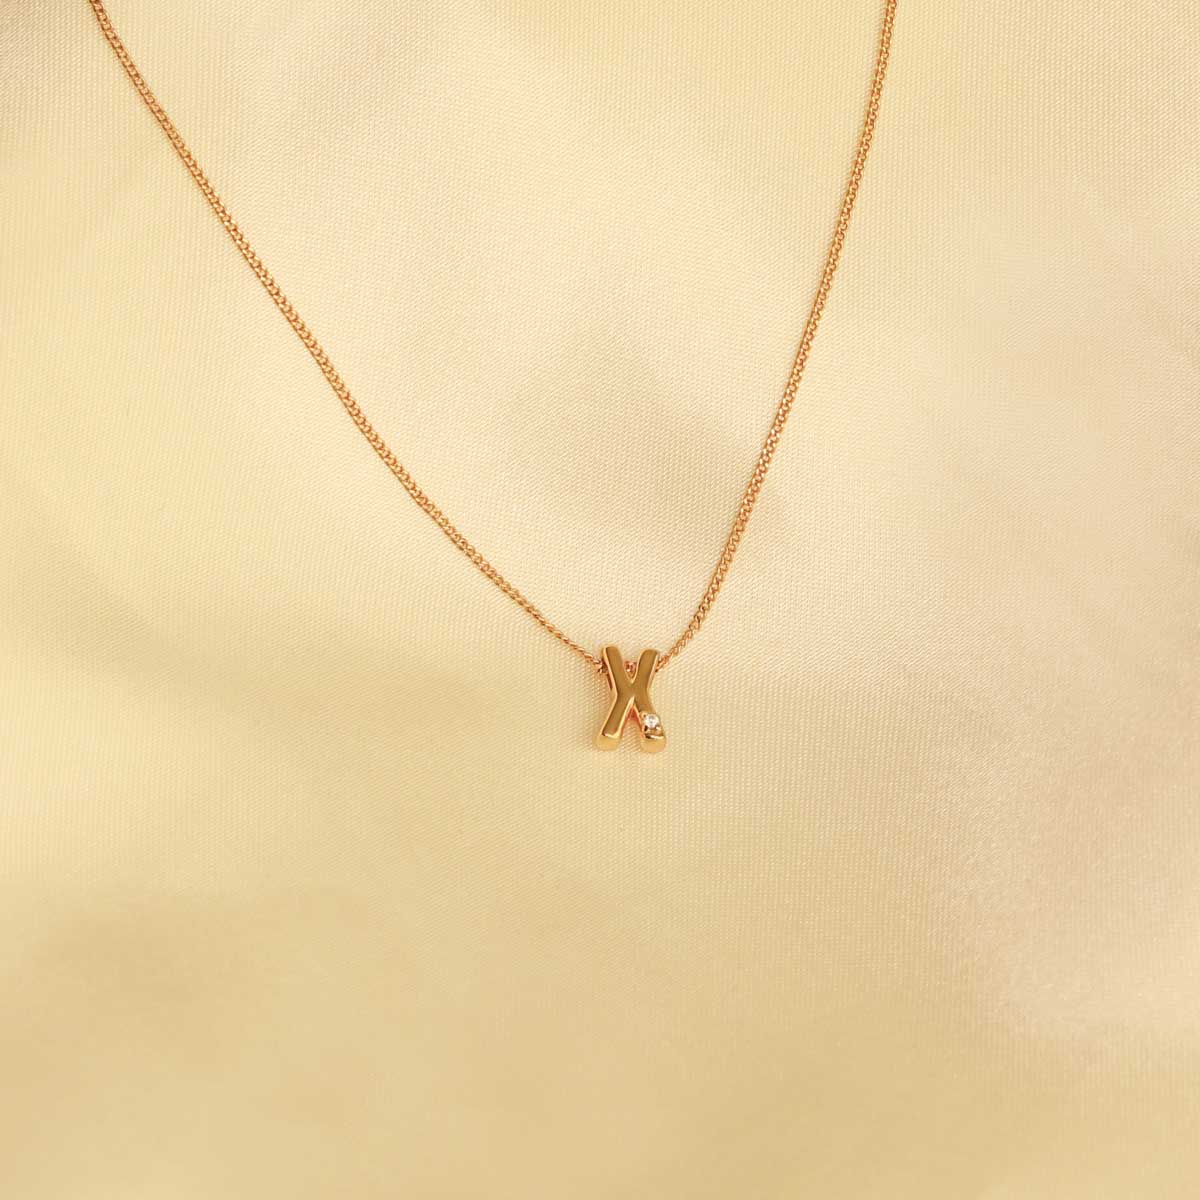 Flat lay shot of X Initial Pendant Necklace in Gold